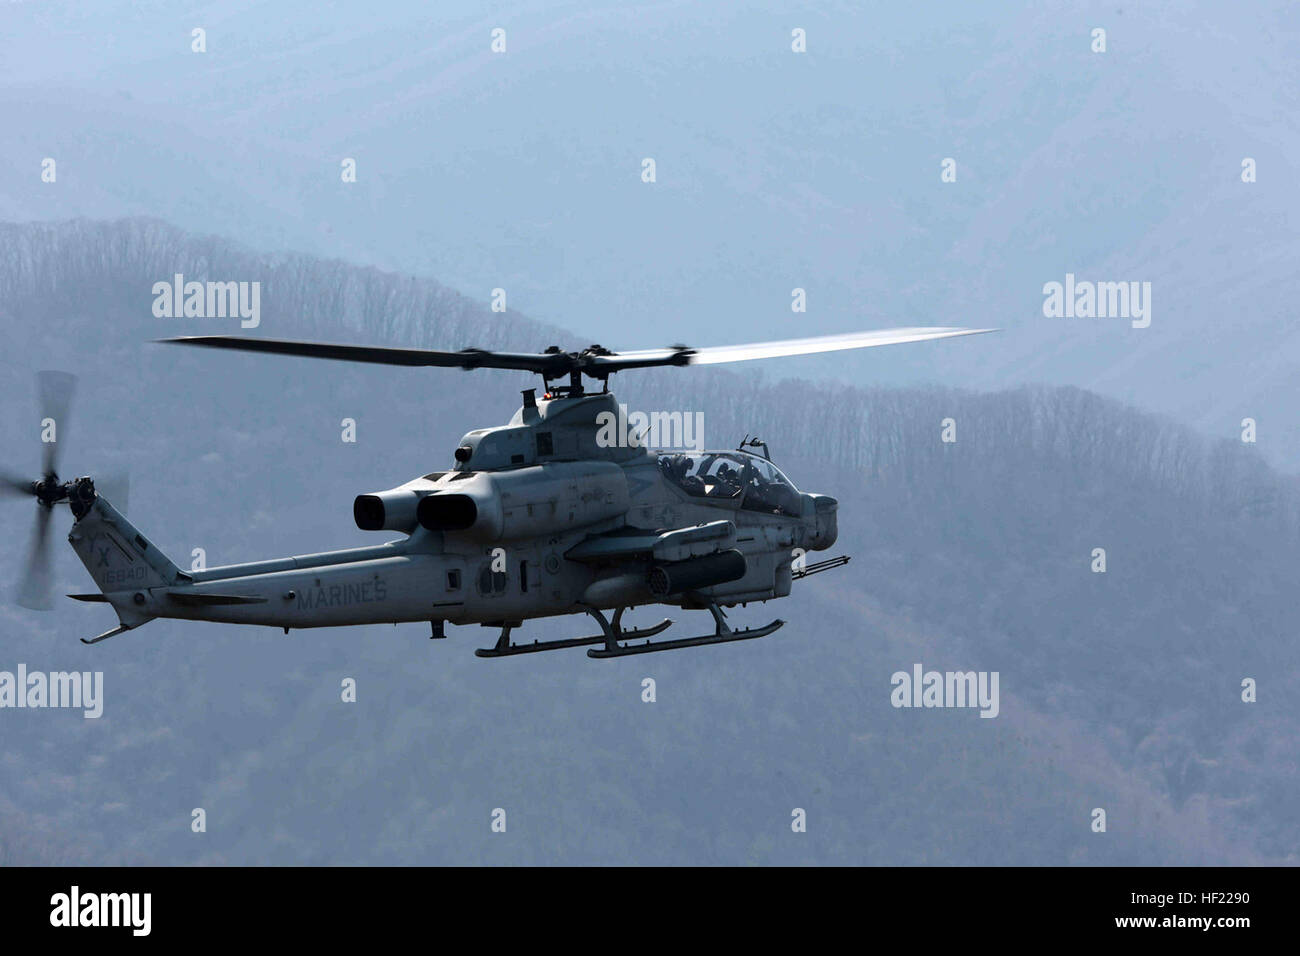 POHANG, SOUTH KOREA (April 1, 2014) – A U.S. Marine Corps AH-1Z Super Cobra assigned to 13th Marine Expeditionary Unit conducts flight operations during Ssang Yong 14 in Pohang, South Korea, April 1, 2014.  Exercise Ssang Yong is conducted annually in the Republic of Korea (ROK) to enhance the interoperability of U.S. and ROK forces by performing a full spectrum of amphibious operations while showcasing sea-based power projection in the Pacific. (Official U.S. Marine Corps photo by Cpl. David Gonzalez/Released) Ssang Yong 140401-M-IO267-154 Stock Photo